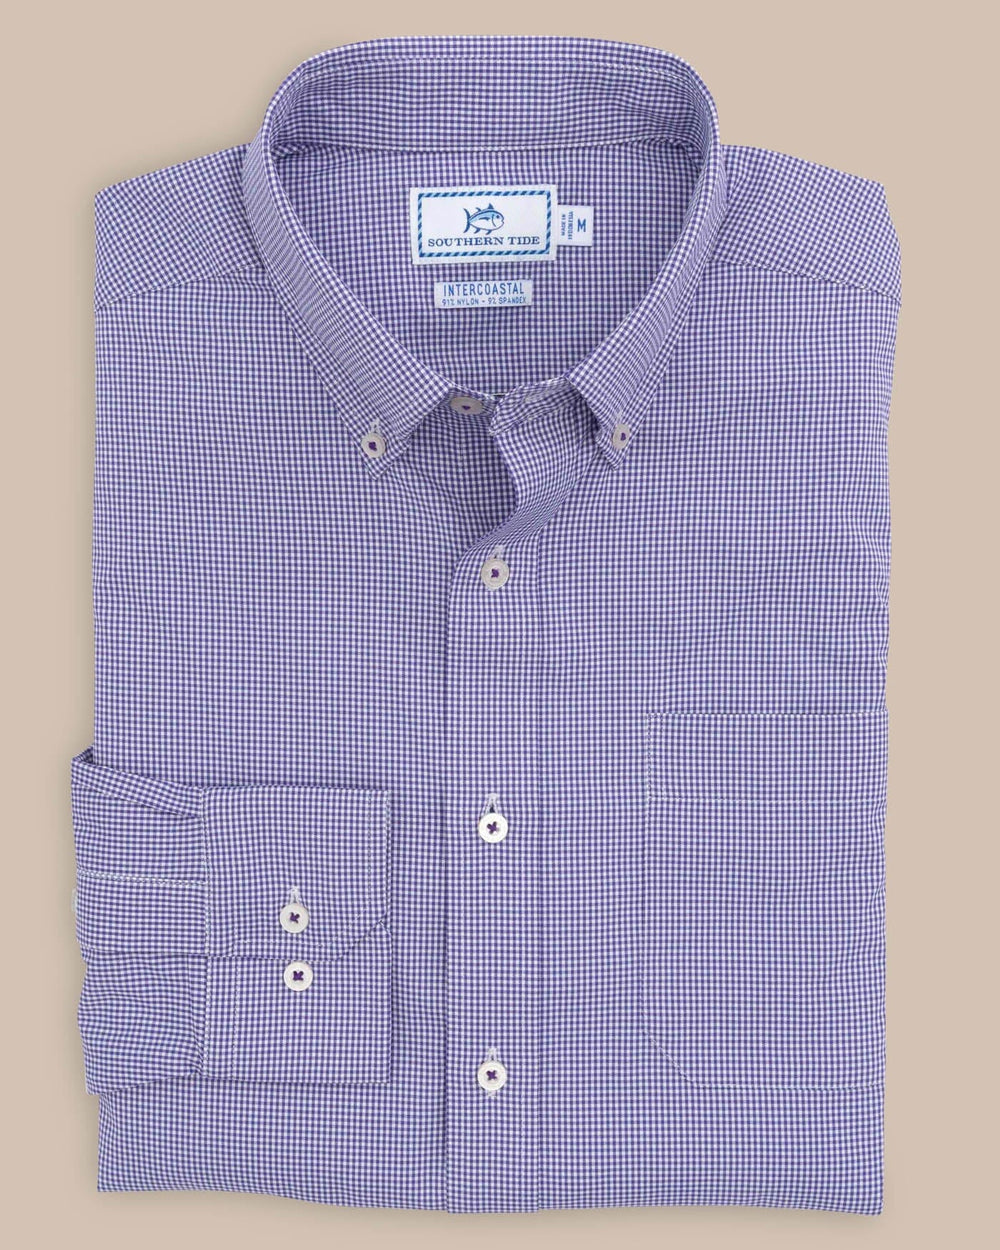 The front view of the Southern Tide Team Colors Gingham Intercoastal Sport Shirt by Southern Tide - Regal Purple